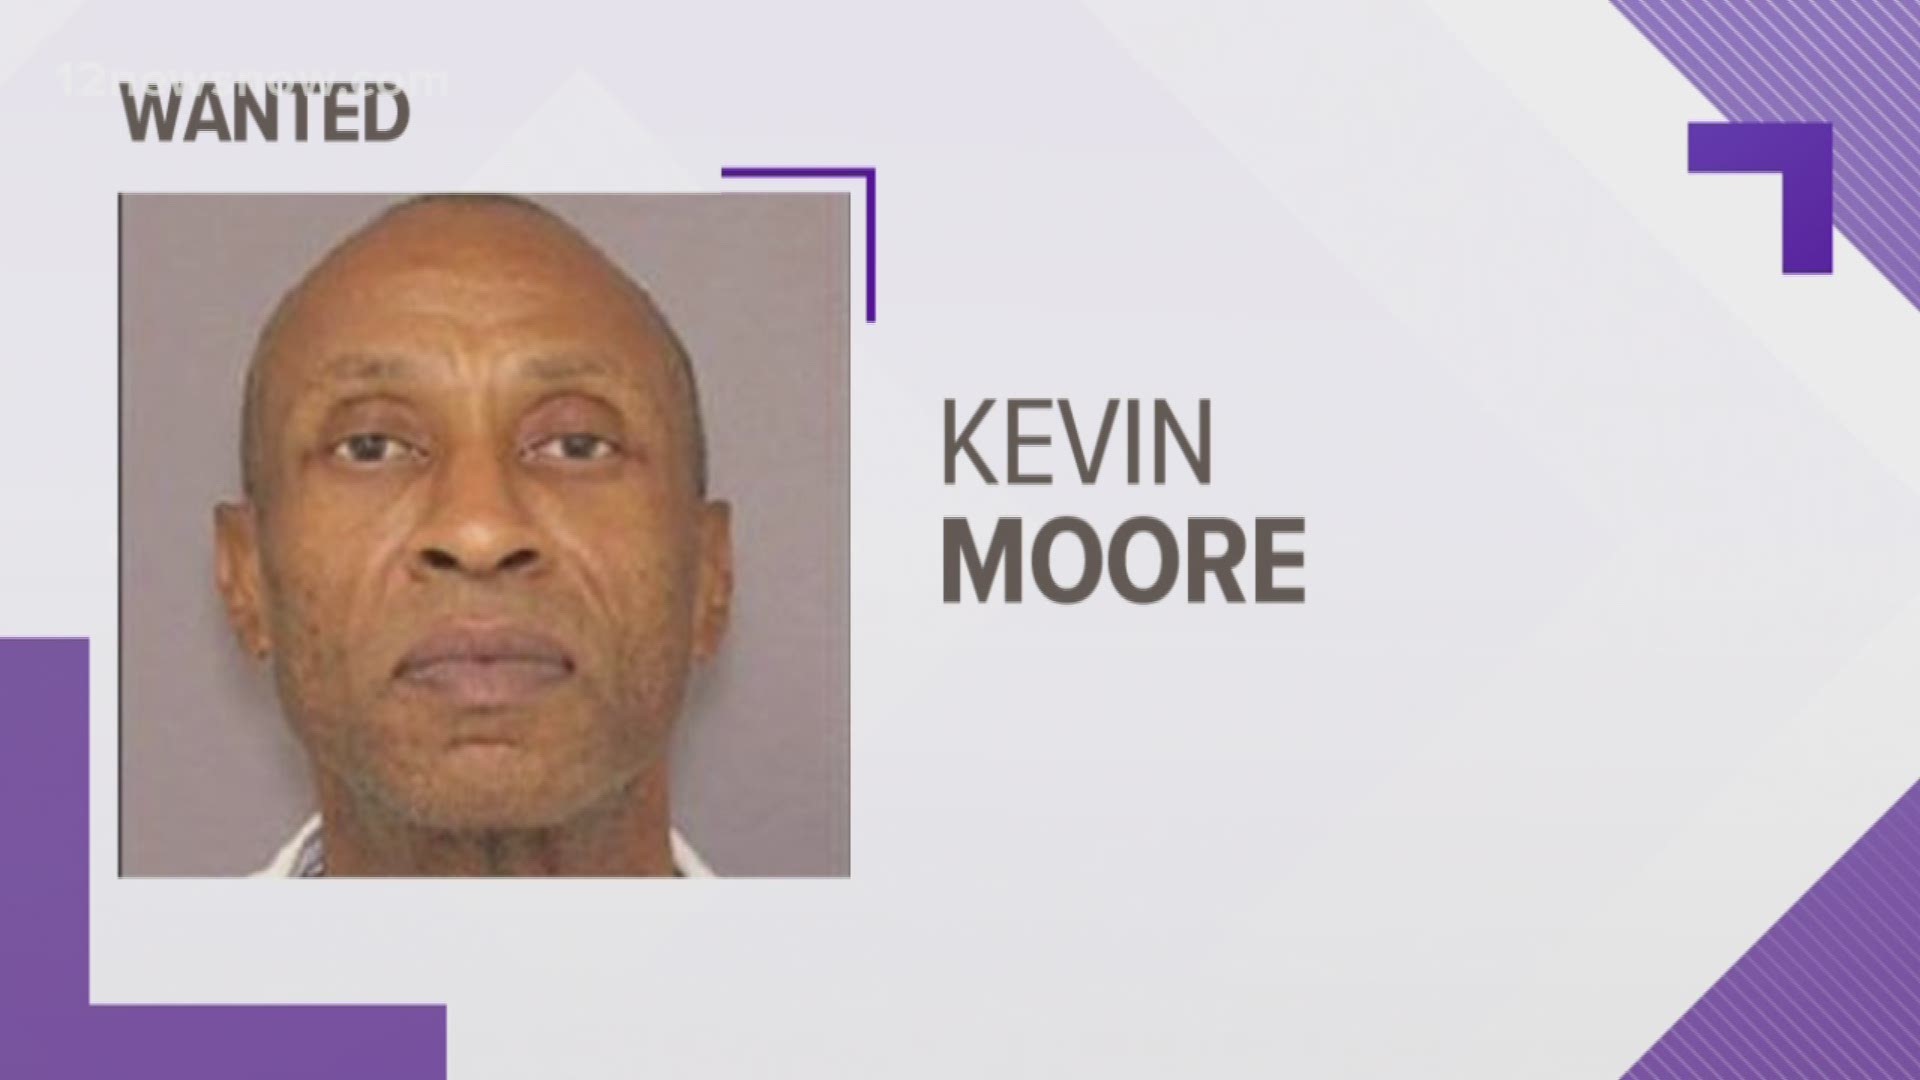 Moore is wanted by the Texas Department of Criminal Justice.